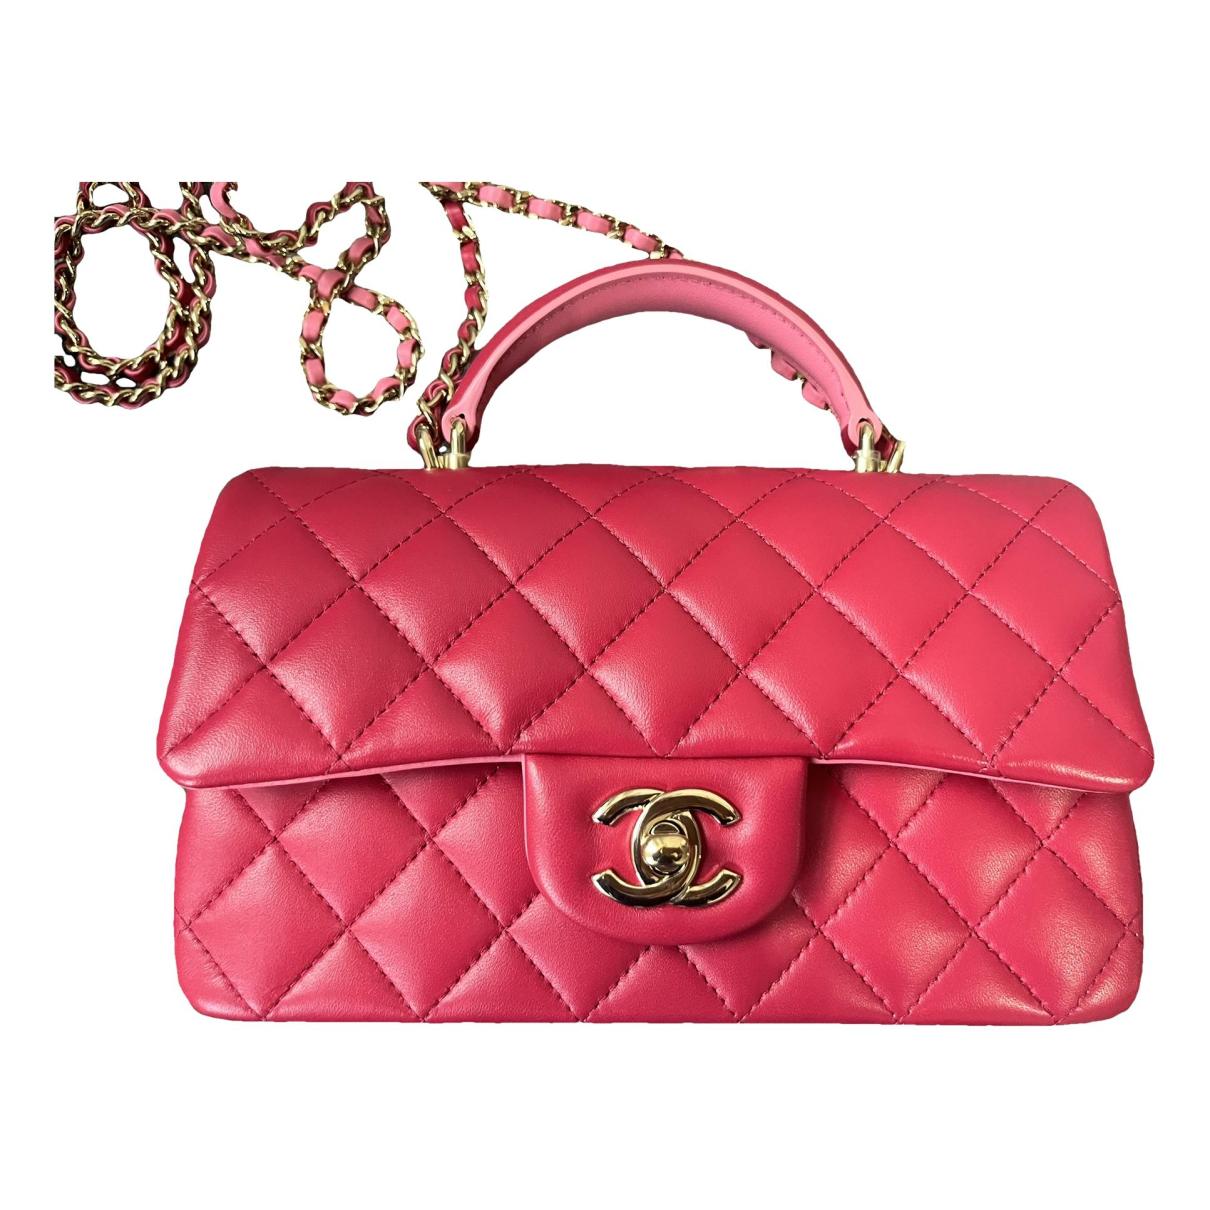 Trendy cc top handle leather handbag Chanel Red in Leather - 36090203